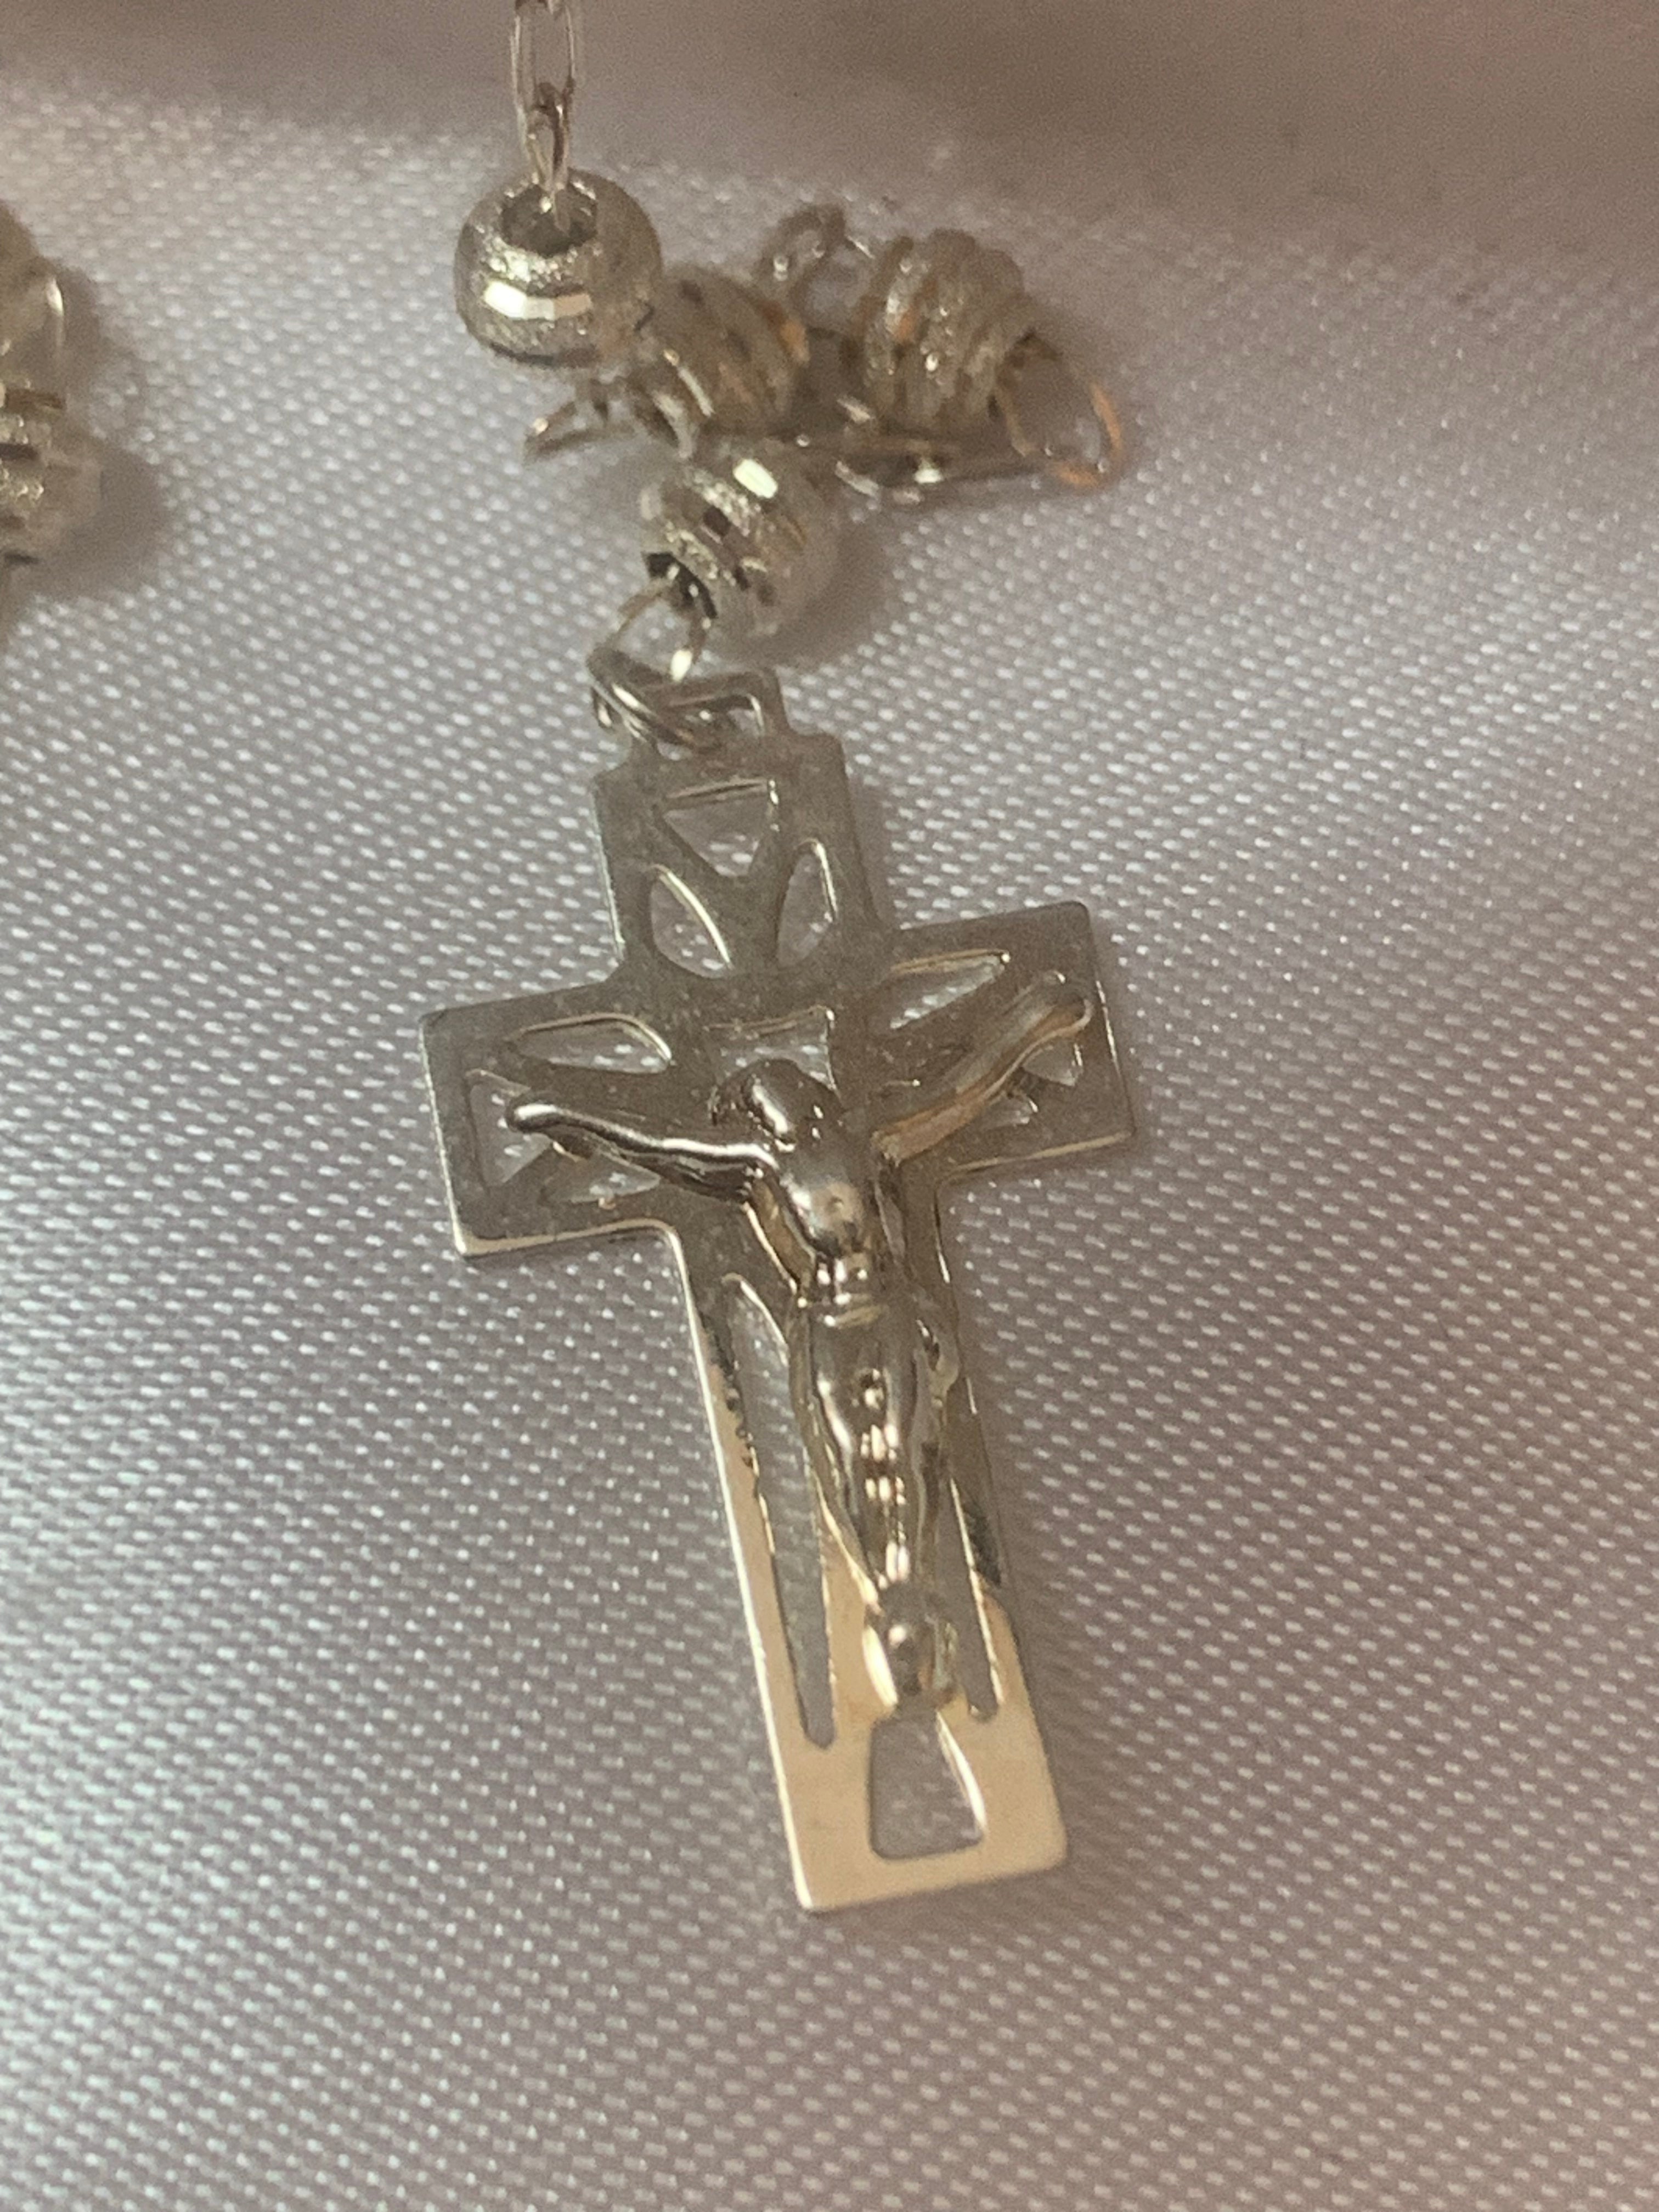 Silver Rosary with Saint Benedict / or Our Lady of Guadalupe medal in the middle